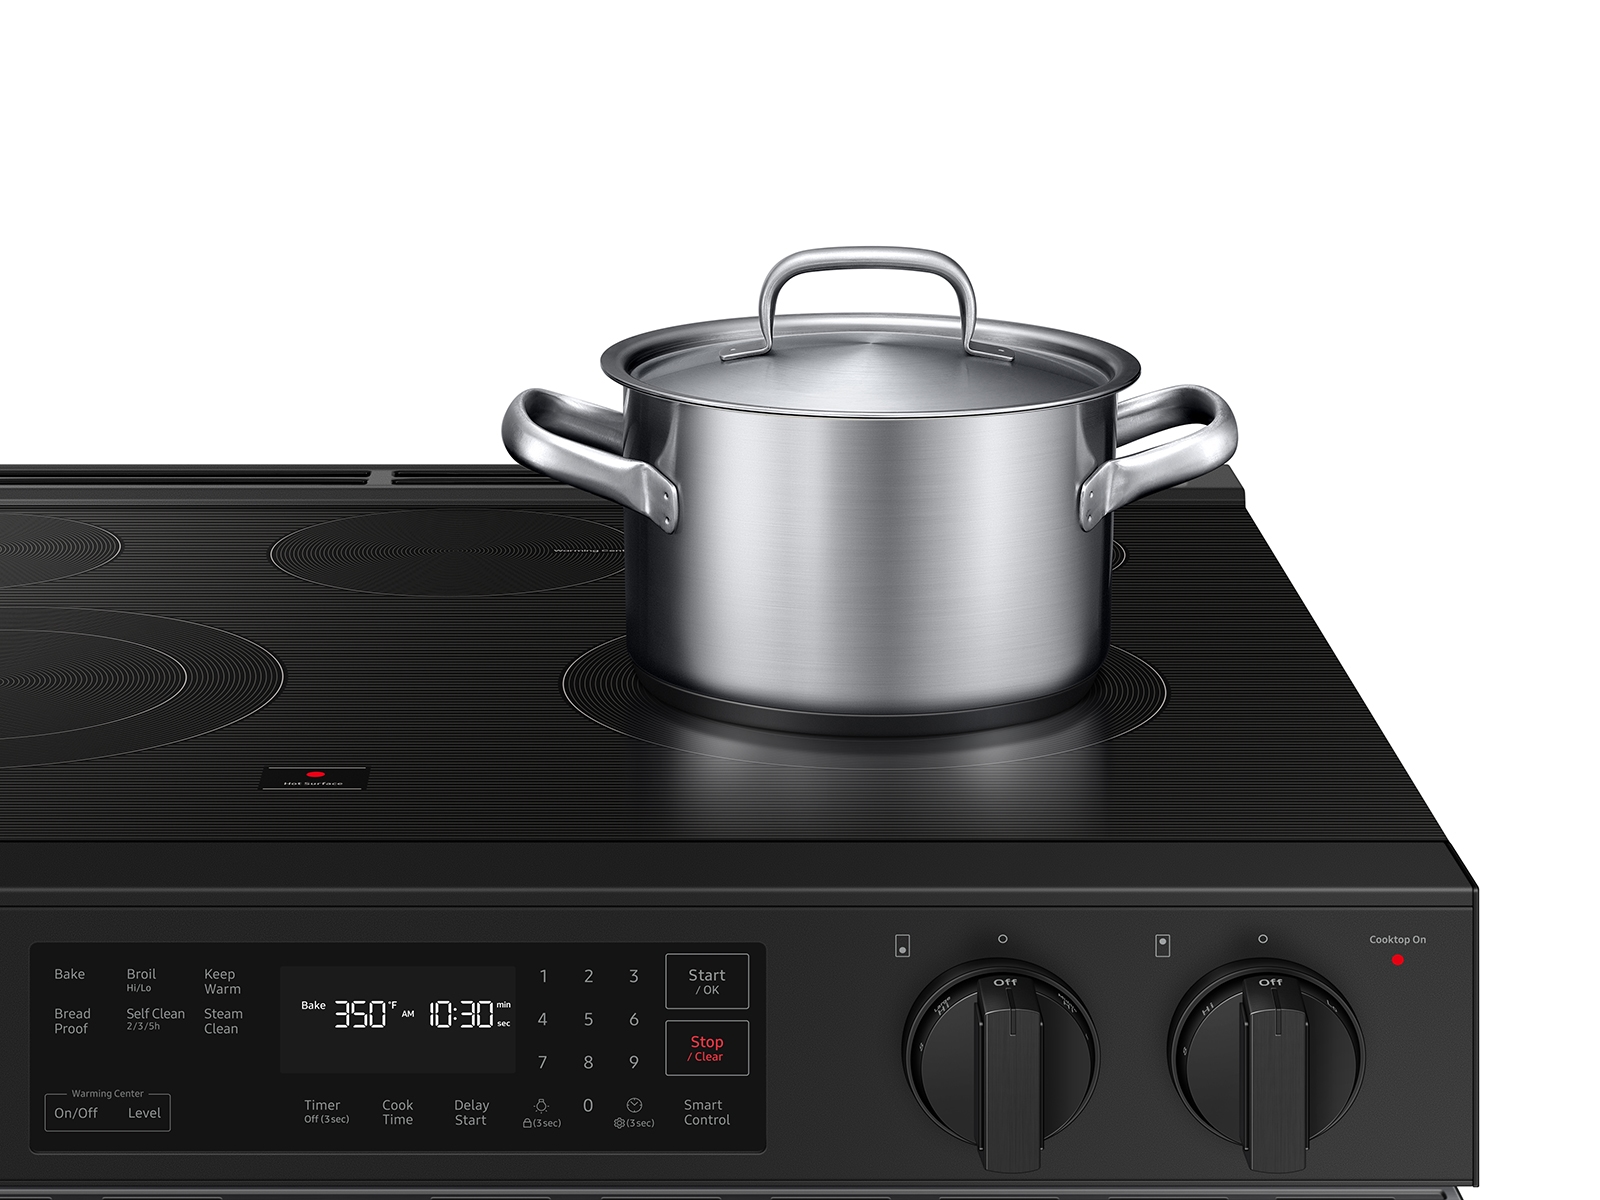 Thumbnail image of Bespoke 6.3 cu. ft. Smart Slide-In Electric Range with Precision Knobs in Stainless Steel